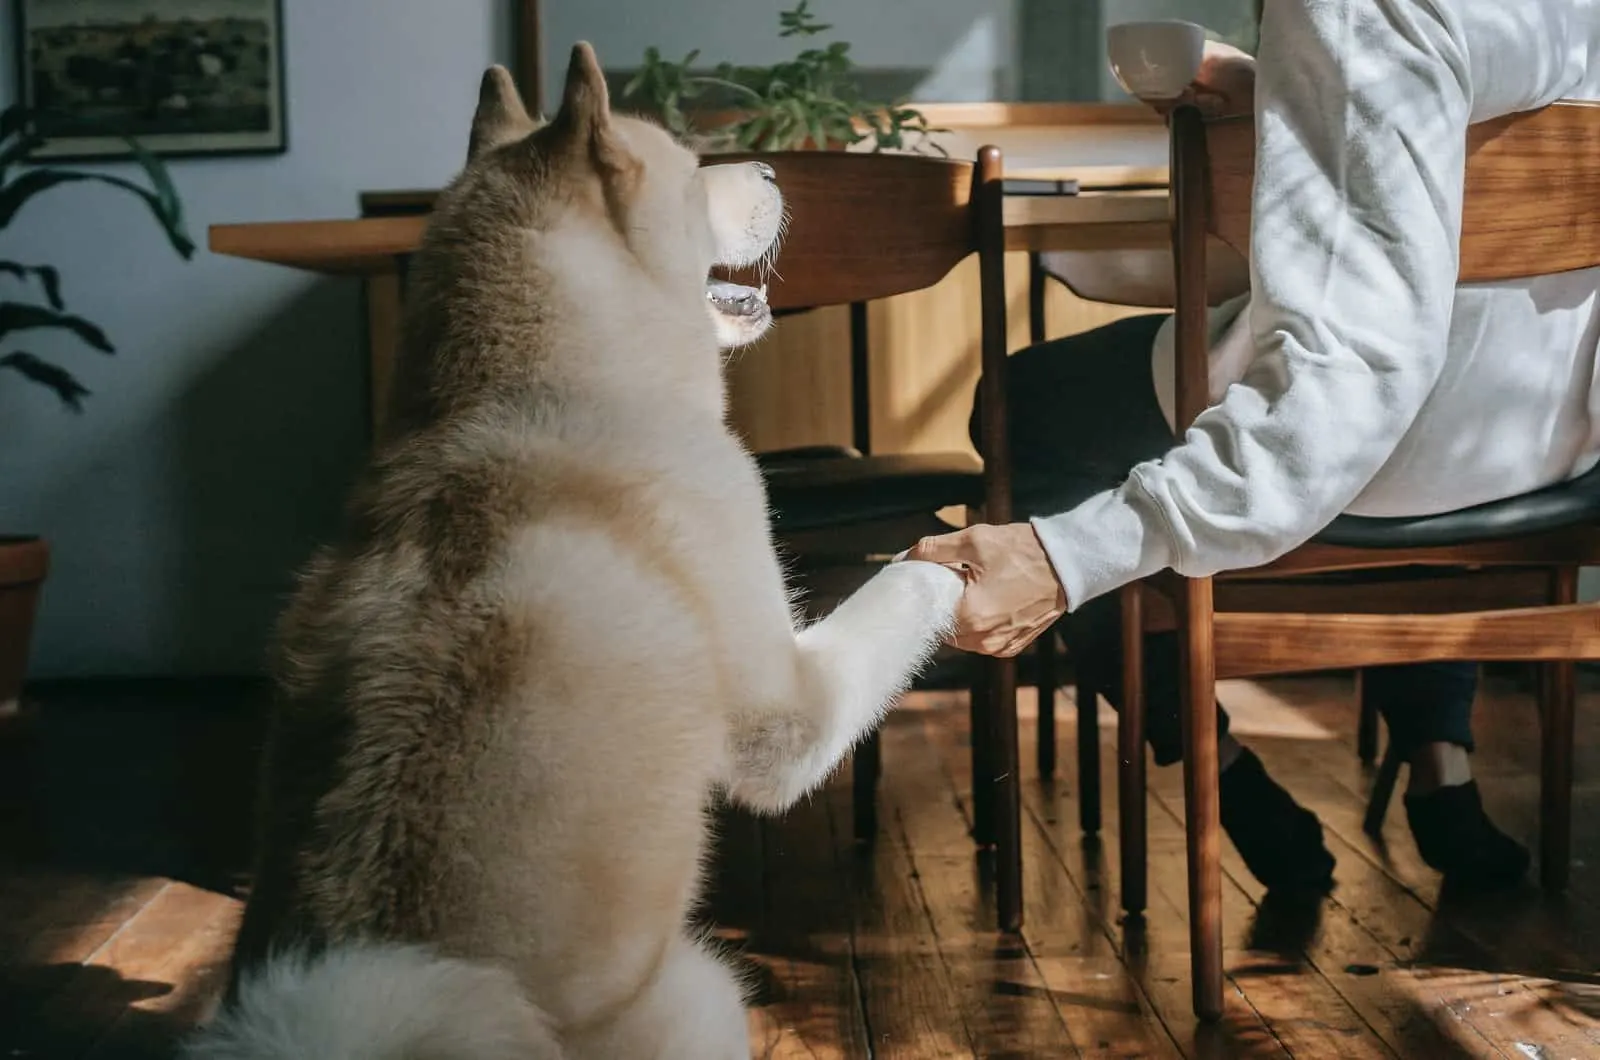 fluffy dog touching owner's hand